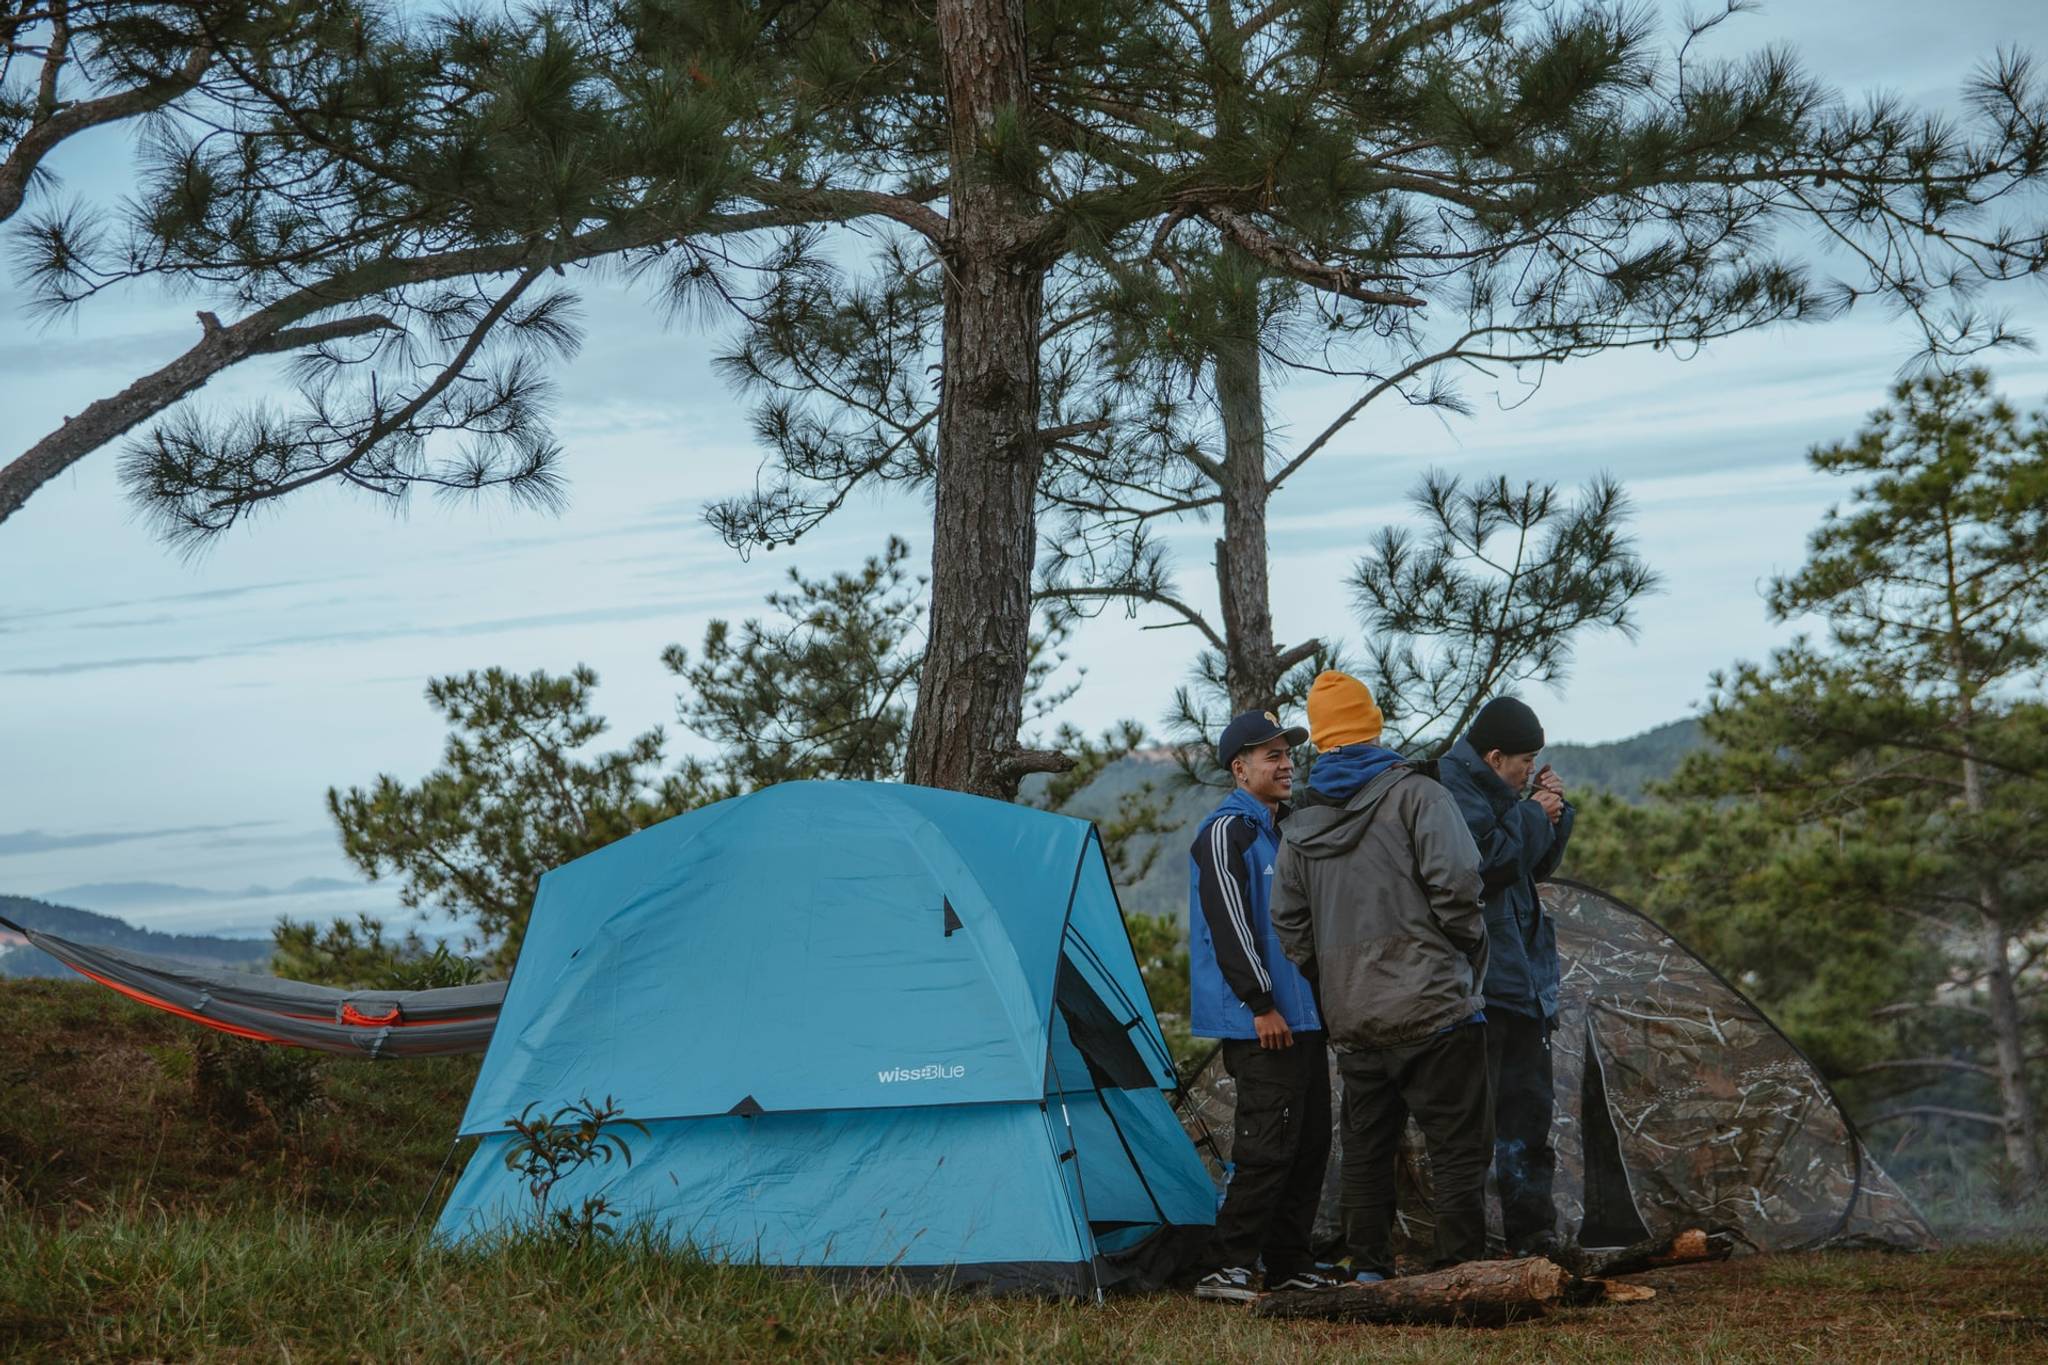 Camping trips give German travellers a distanced thrill